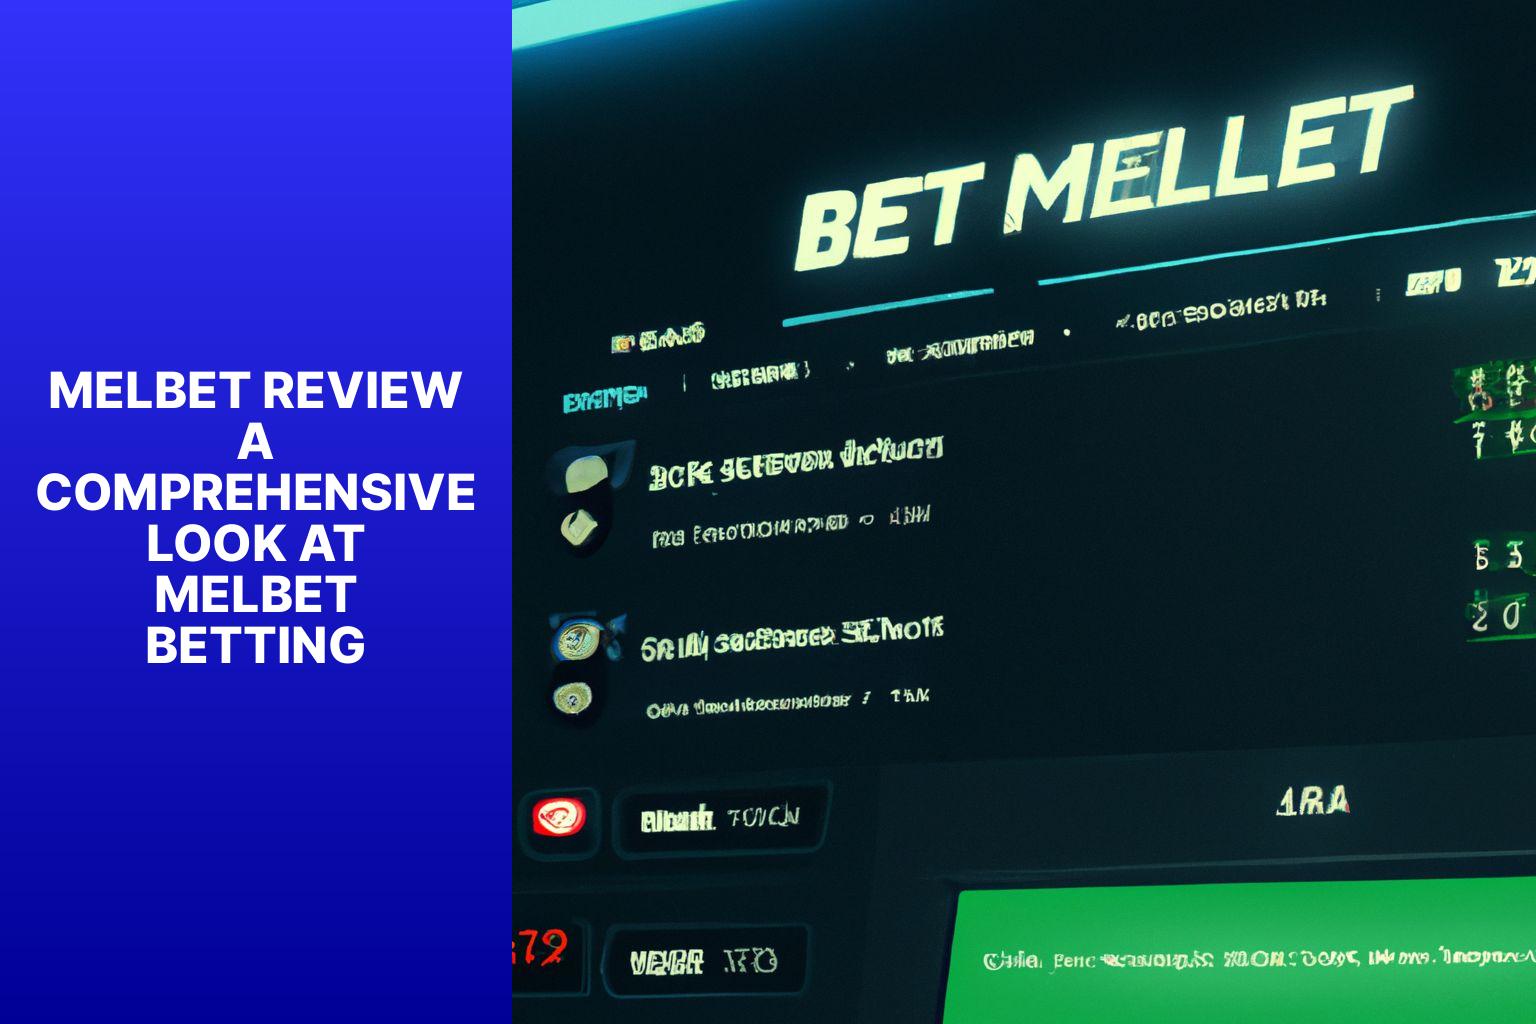 MelBet Review A Comprehensive Look at MelBet Betting